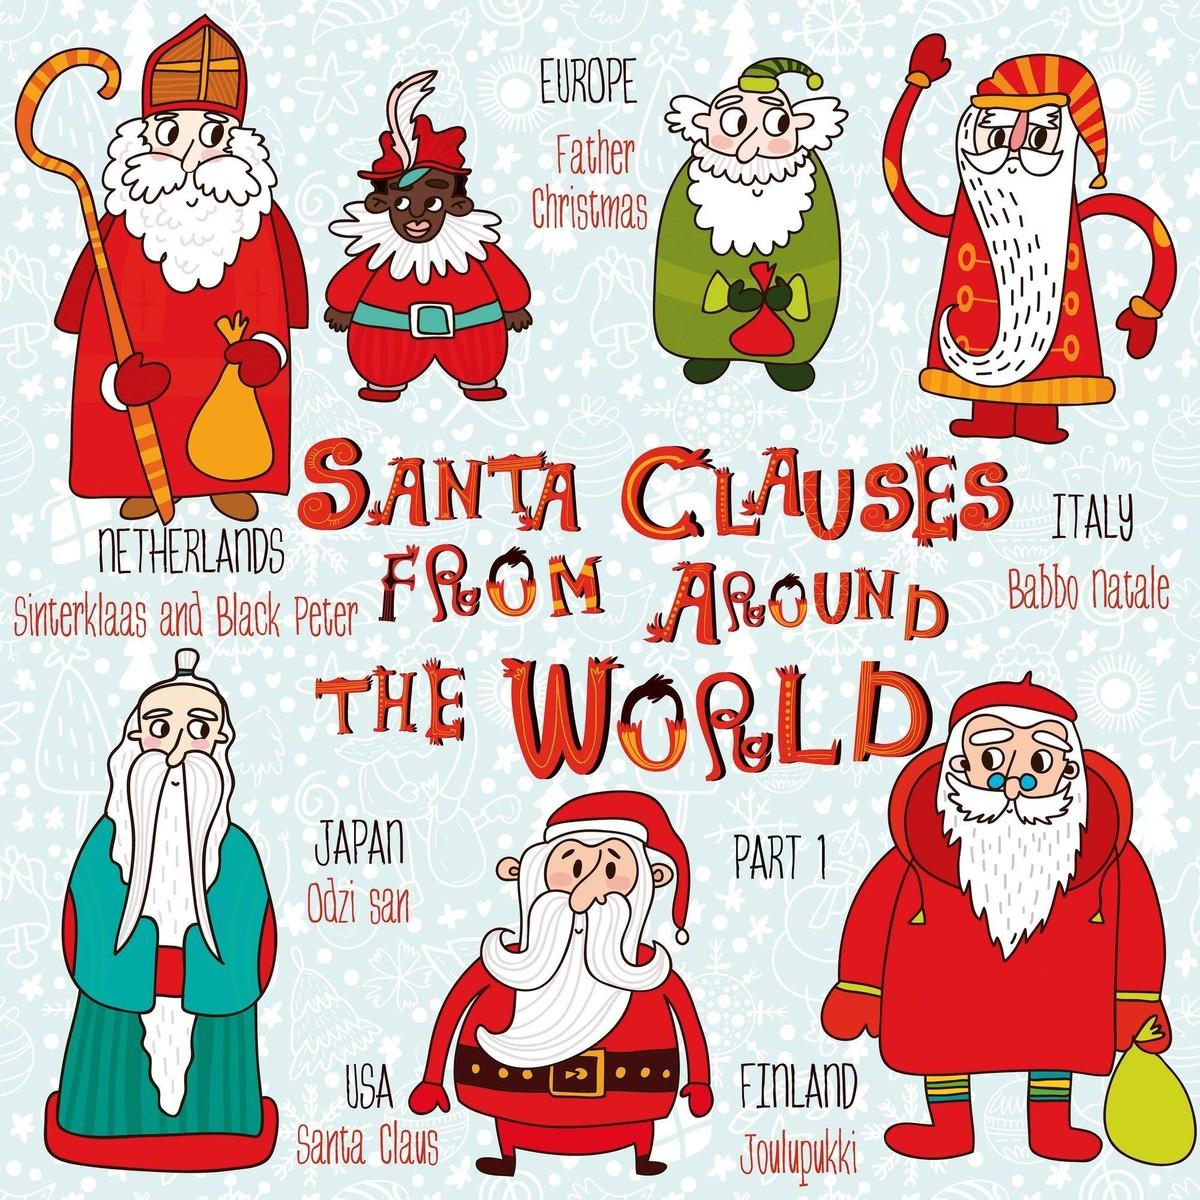 Santa Clauses from around the world